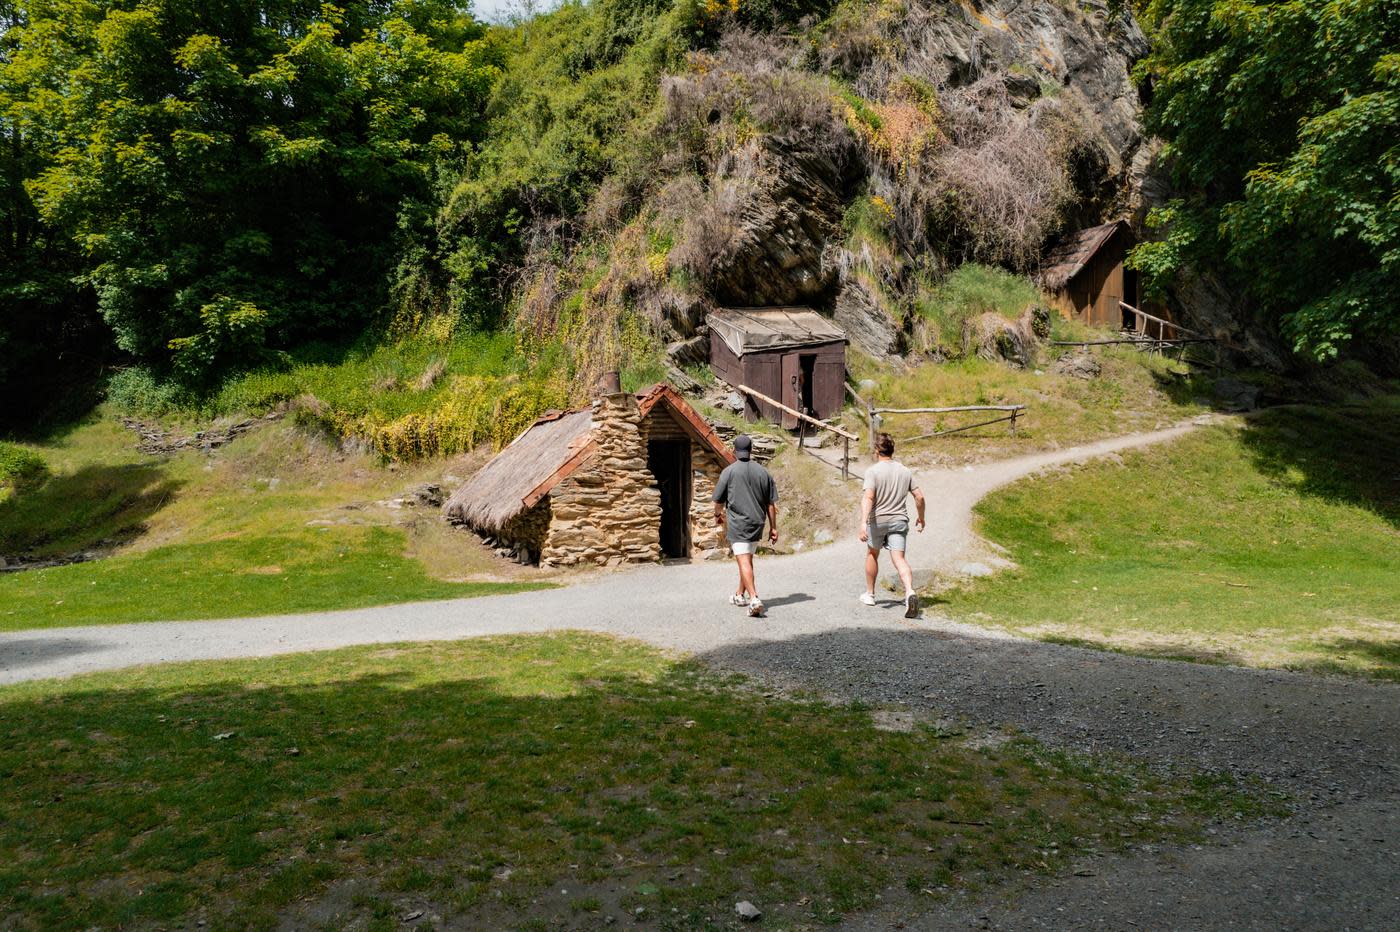 People exploring the historic Chinese Village huts in Arrowtown